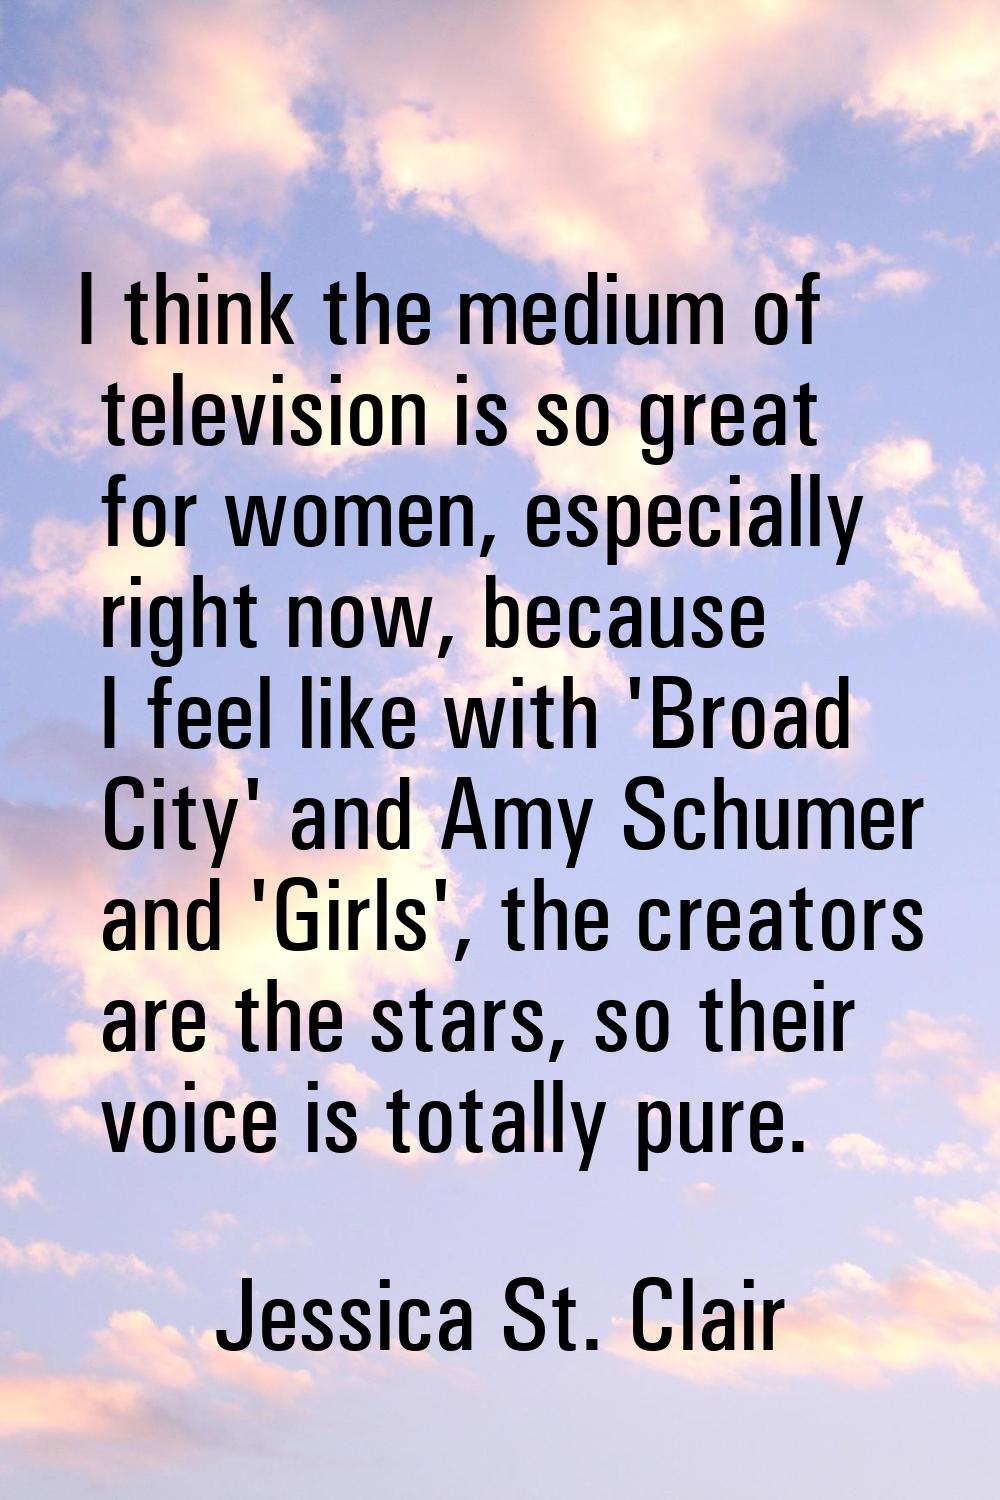 I think the medium of television is so great for women, especially right now, because I feel like w